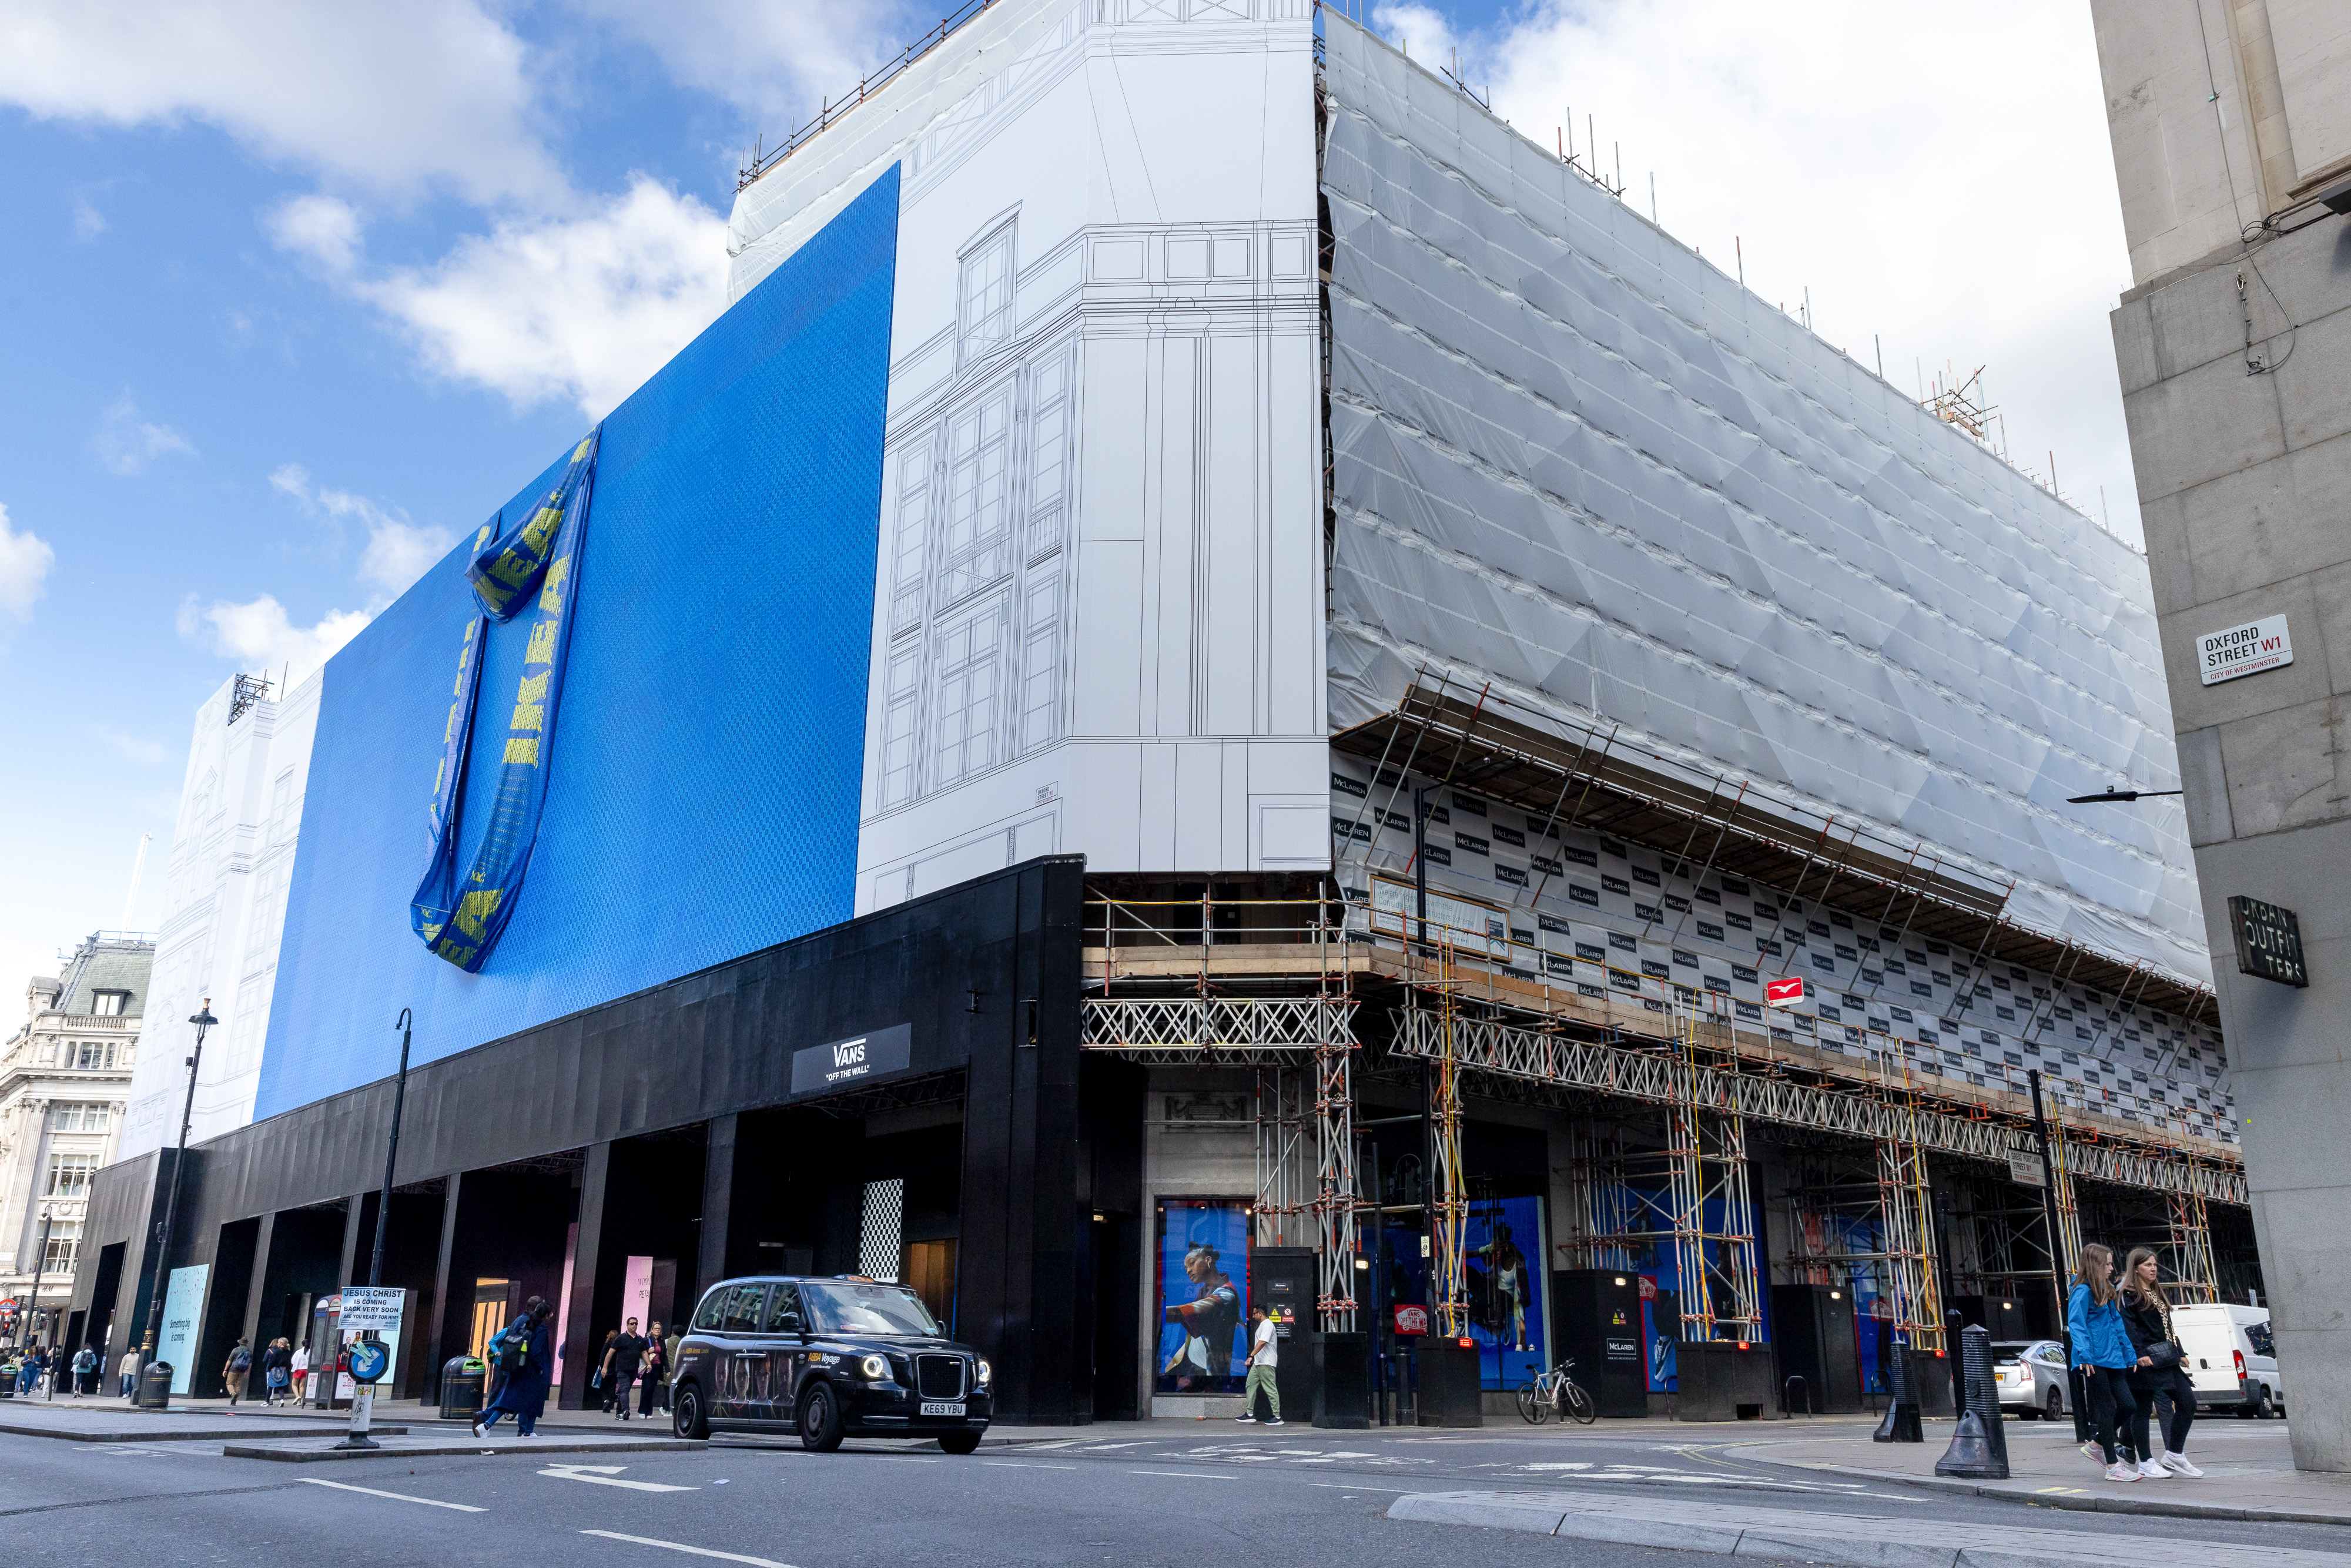 Ikea has been forced to delay the opening of its highly anticipated Oxford Street store